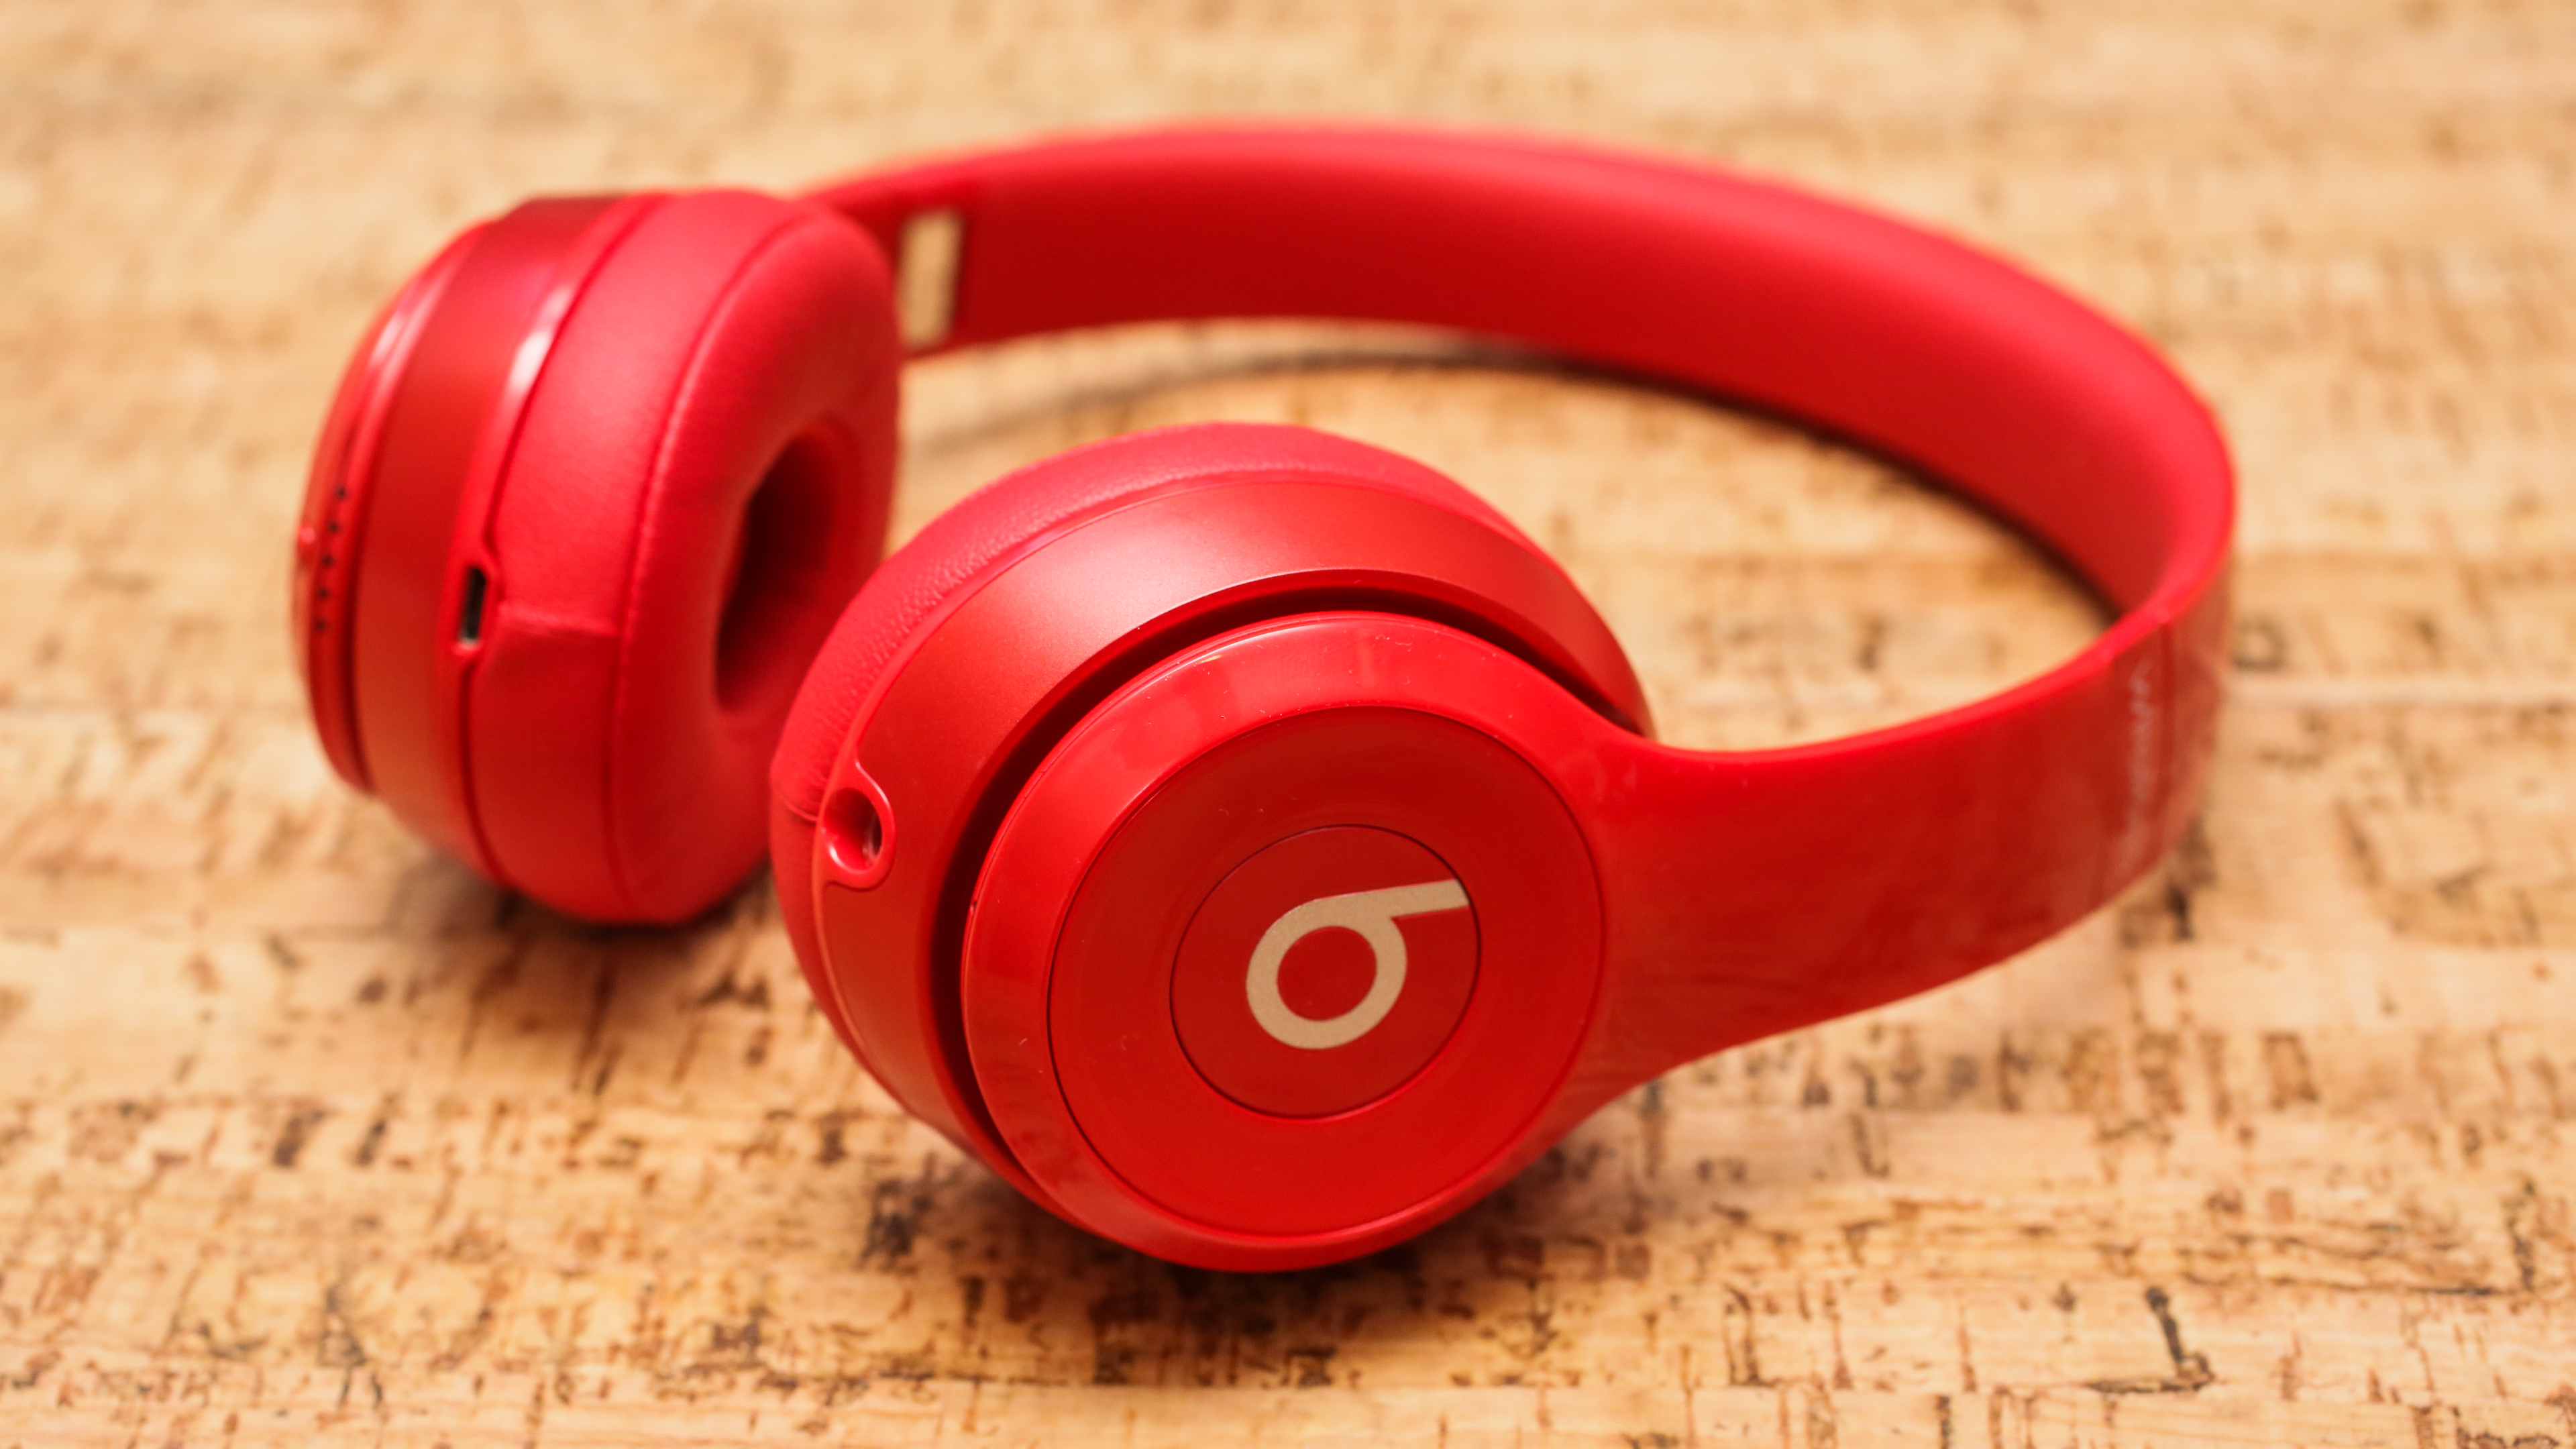 beats solo 2 wired review